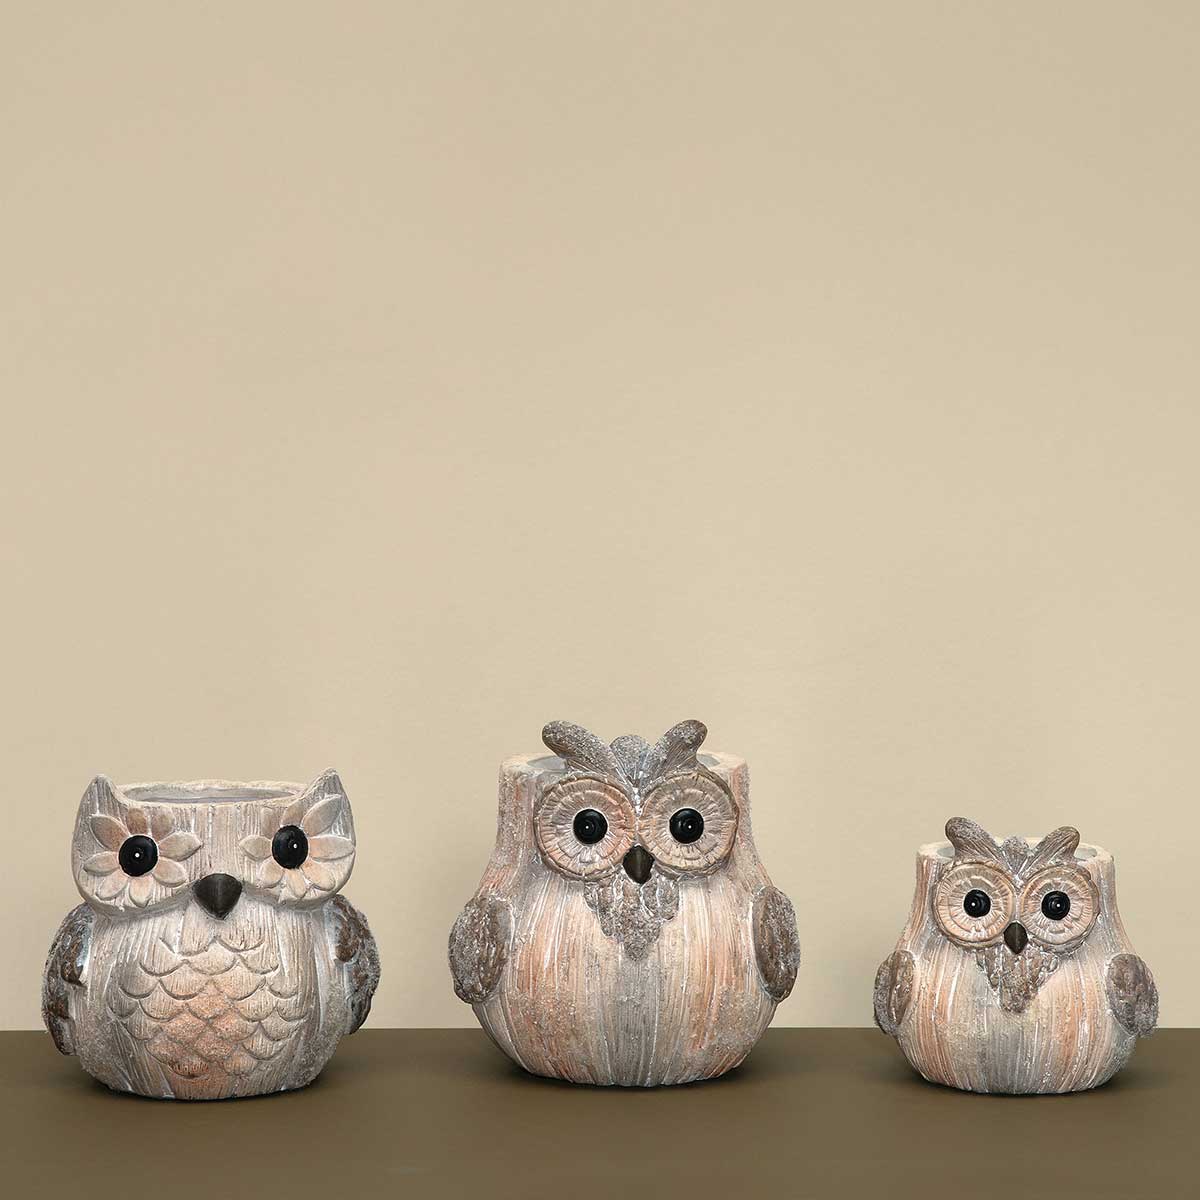 OLLIE FROSTED CERAMIC OWL POT CREAM/BROWN WITH MICA SM - Click Image to Close